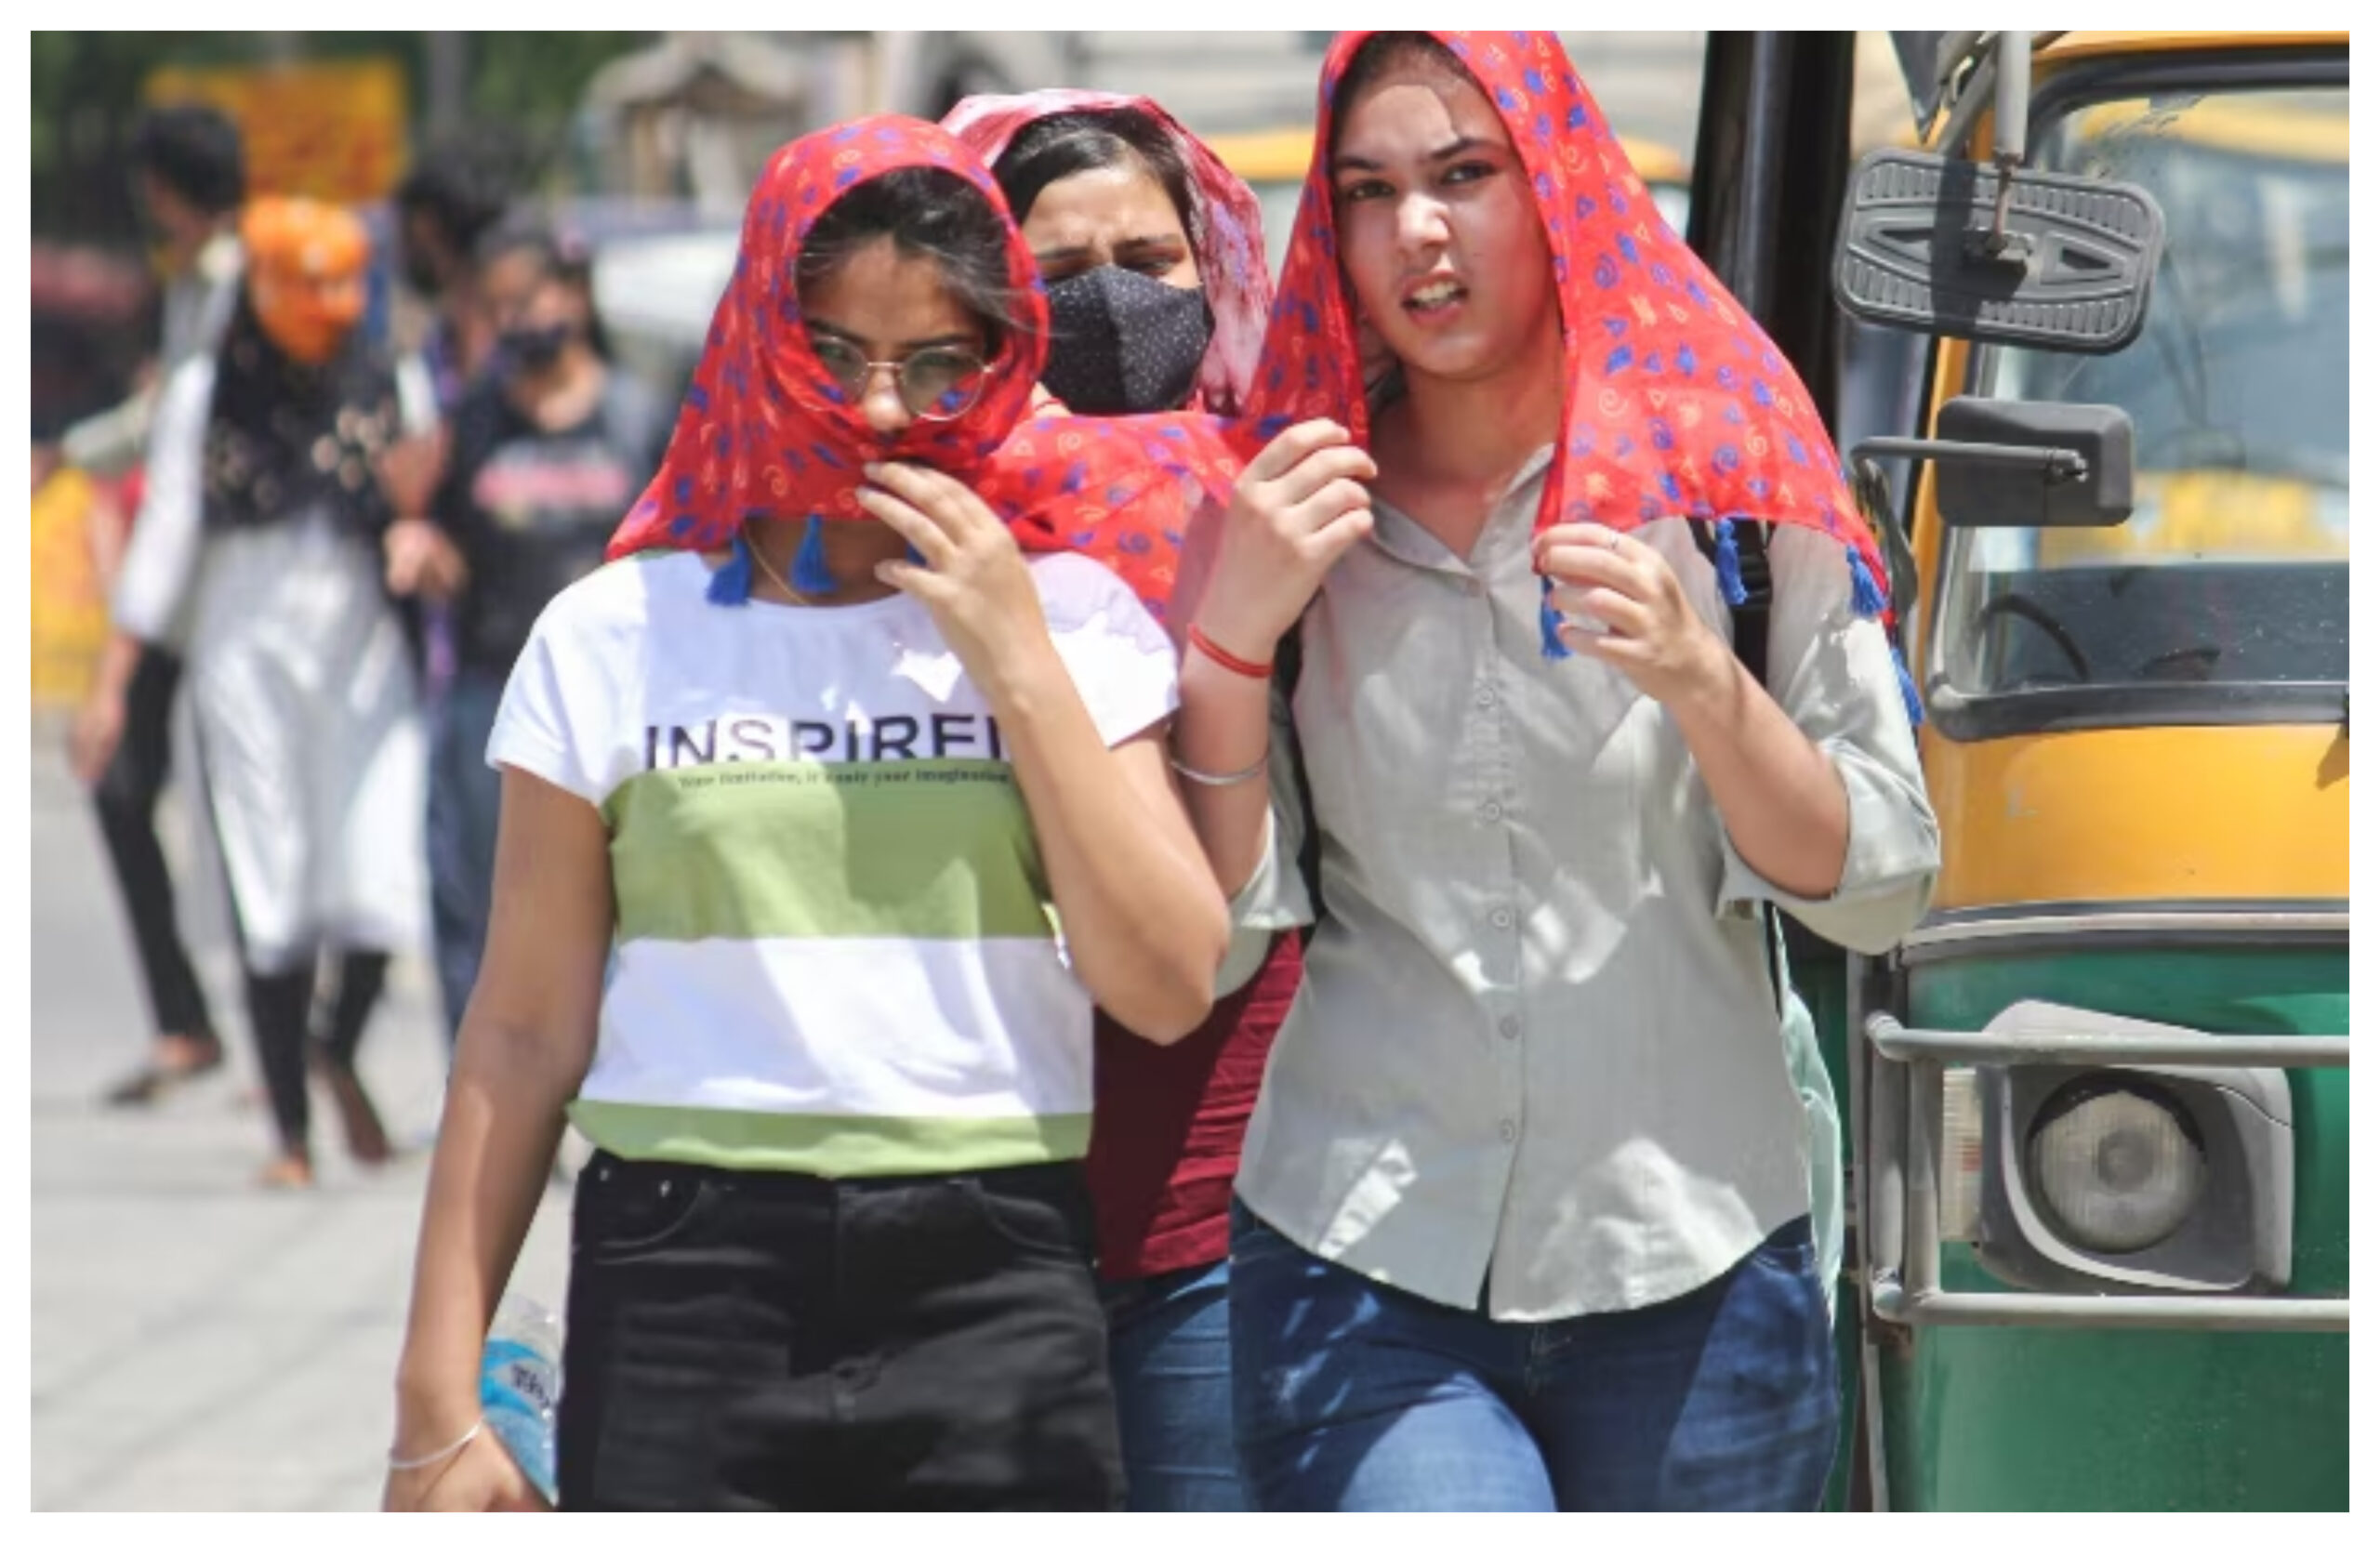 Weather Update: No respite from heat even after rain, chances of heat wave